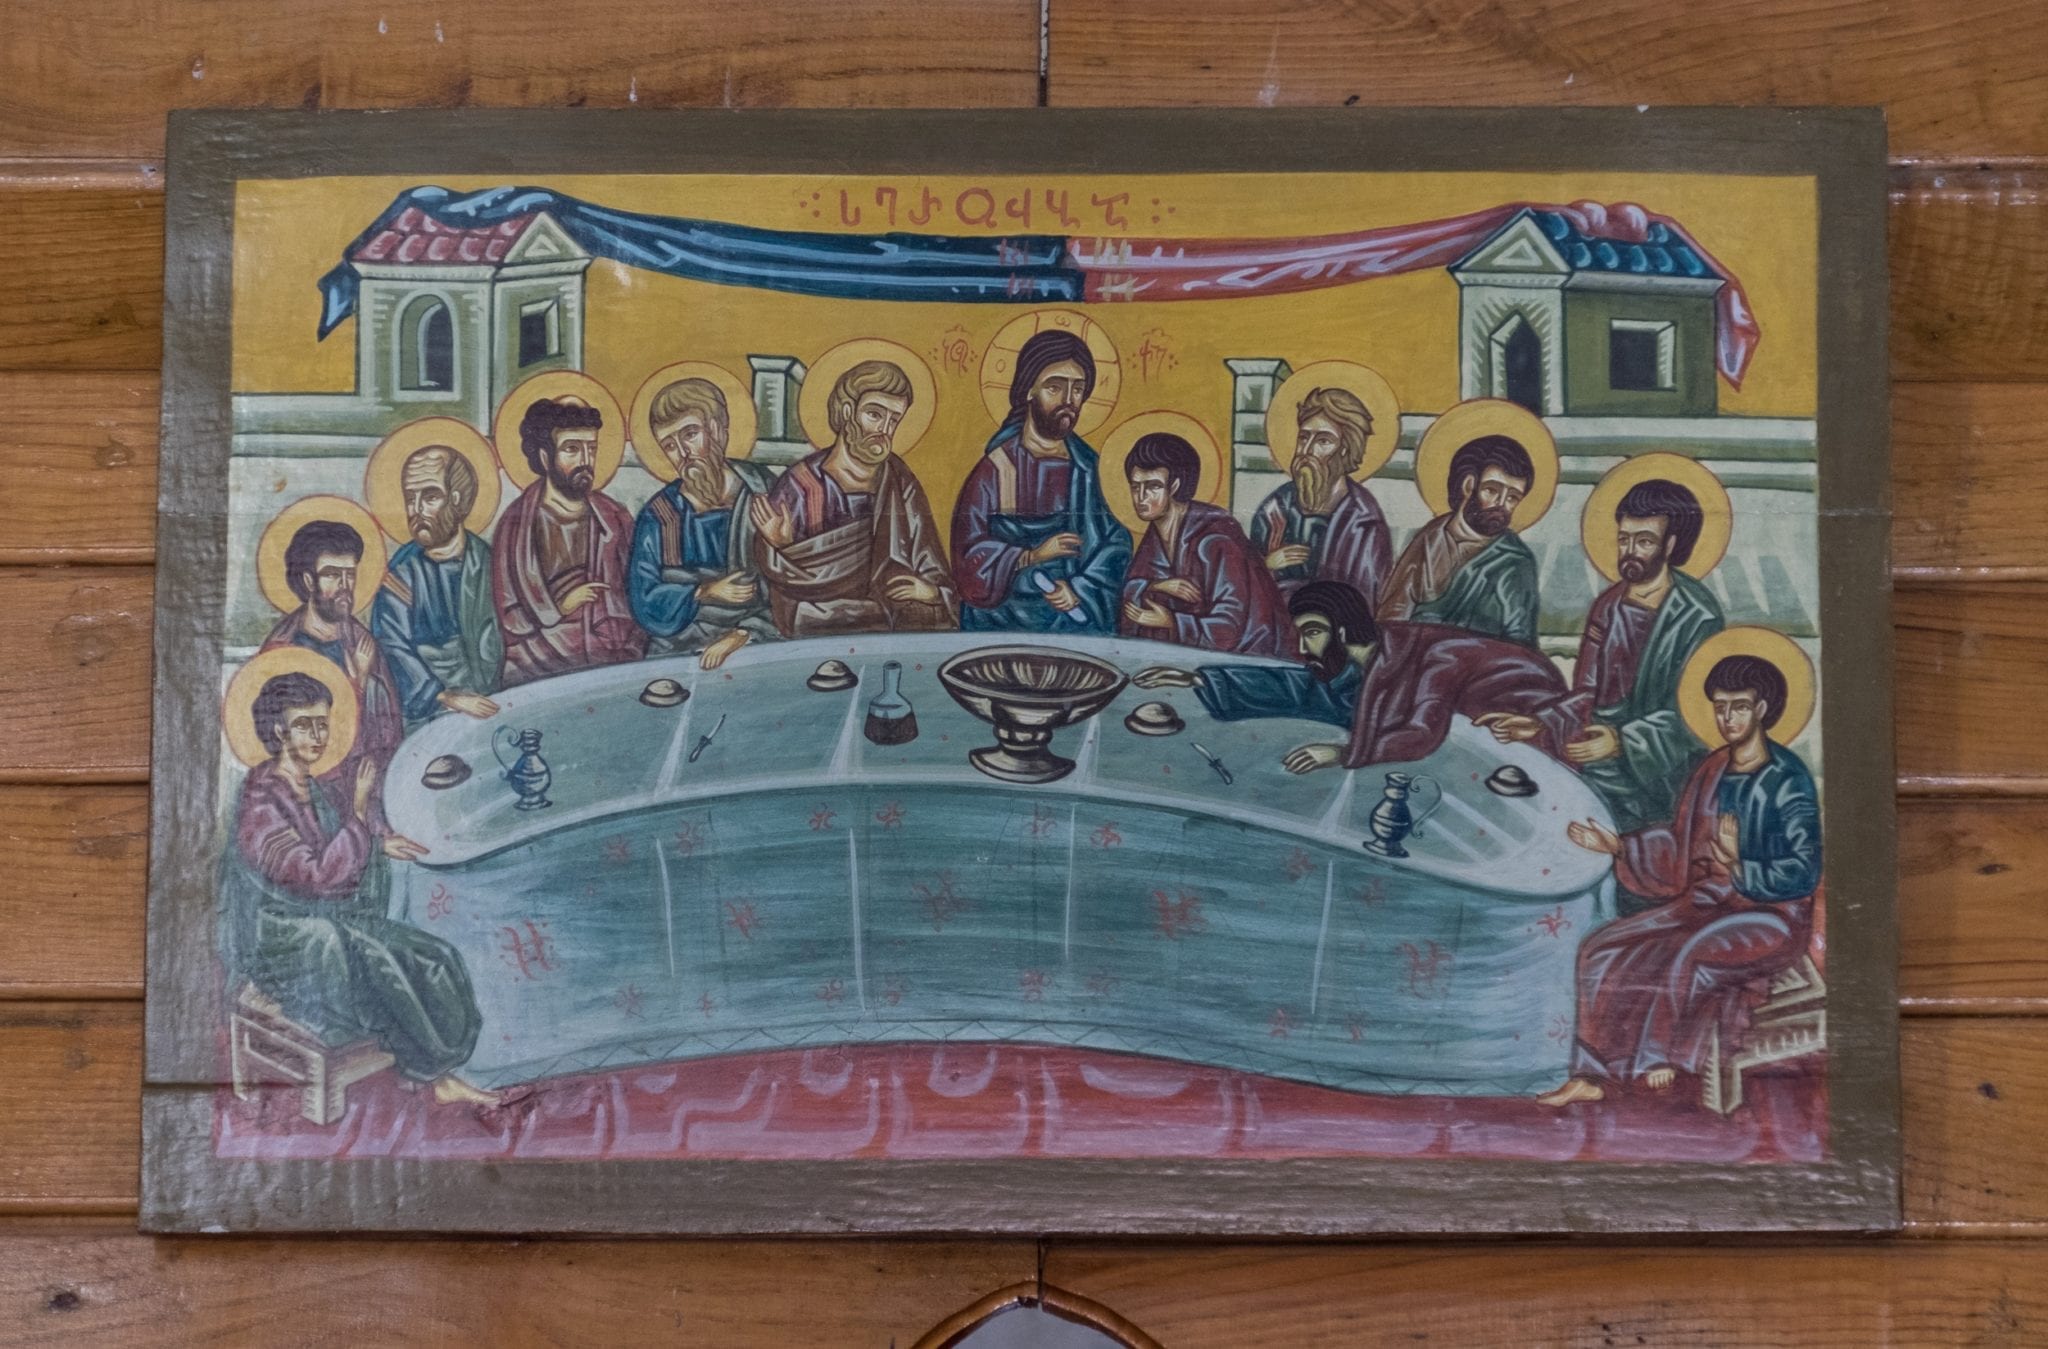 A close-up on a Georgian painting of The Last Supper, with Jesus in the middle surrounded by the disciples.